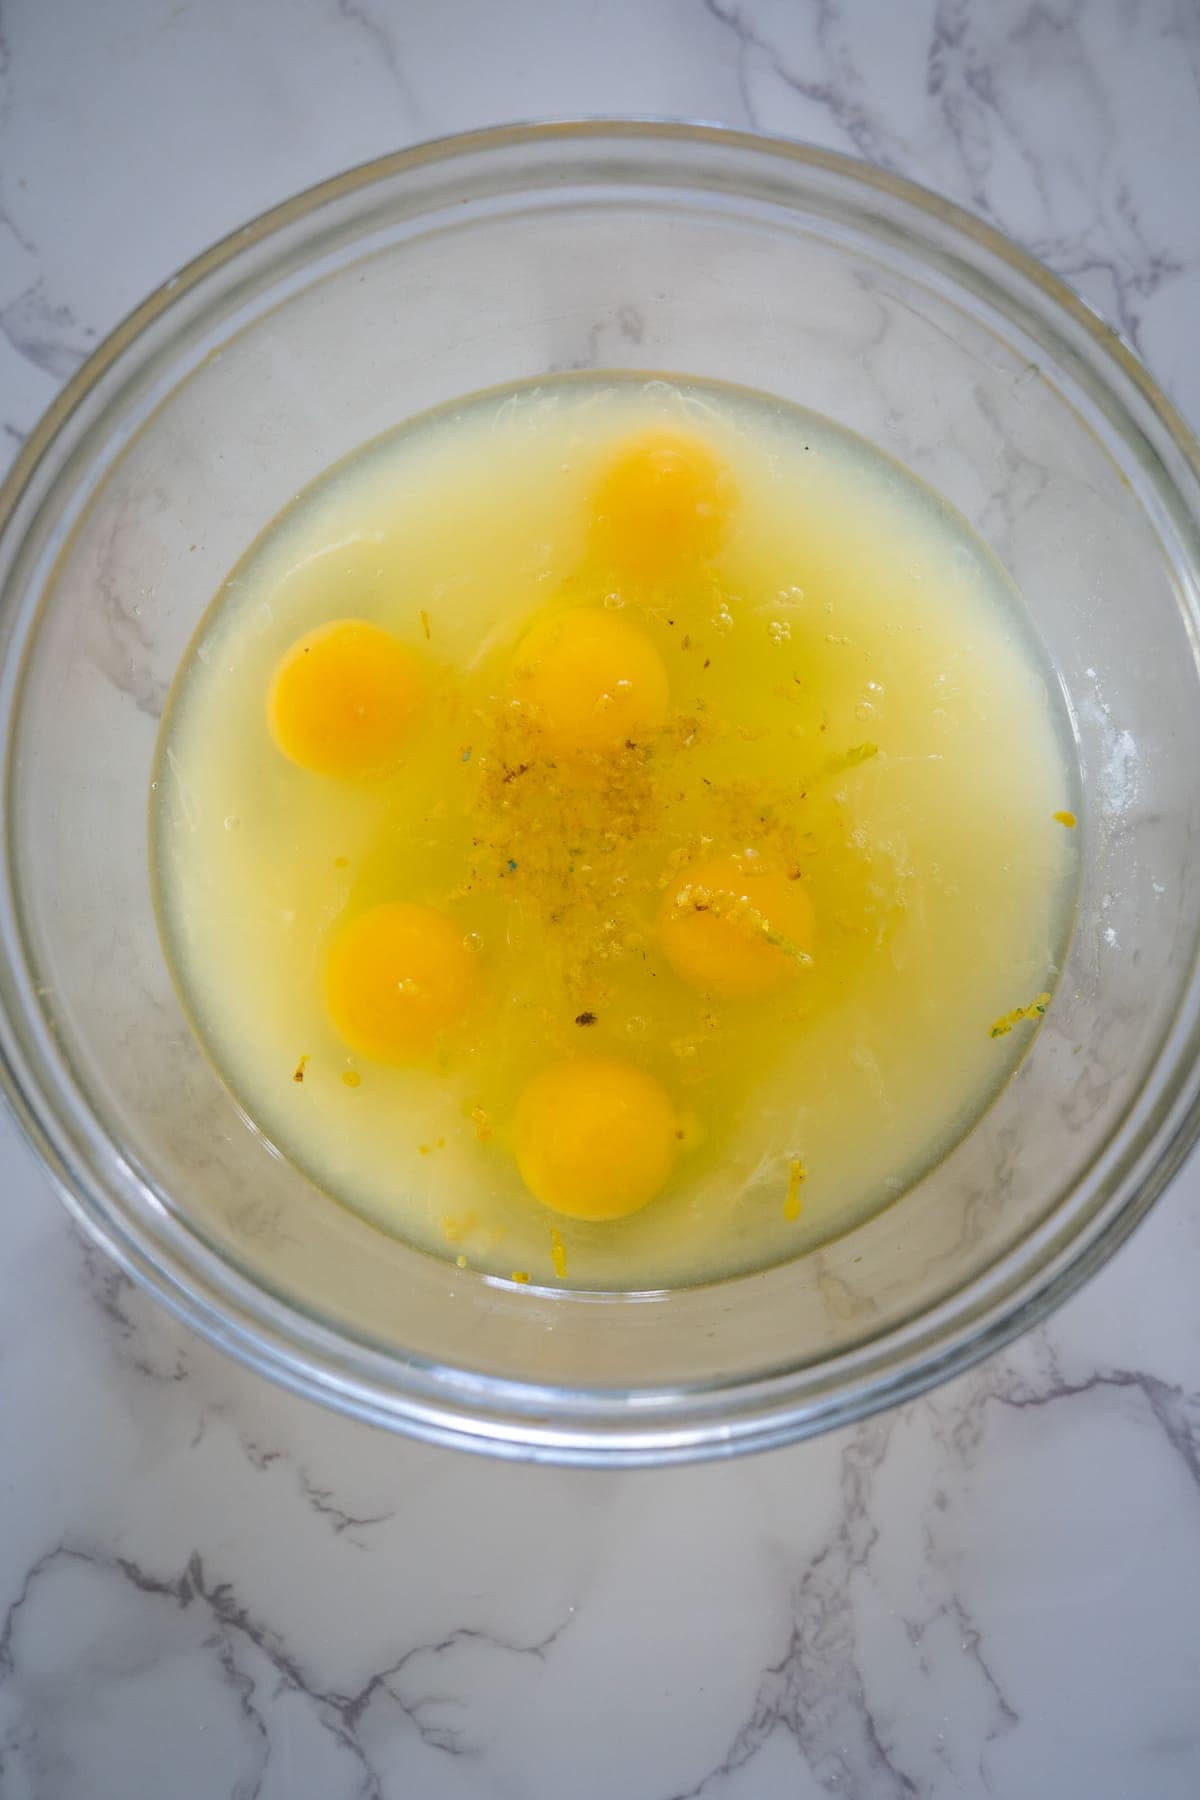 Eggs in a bowl on a marble countertop.